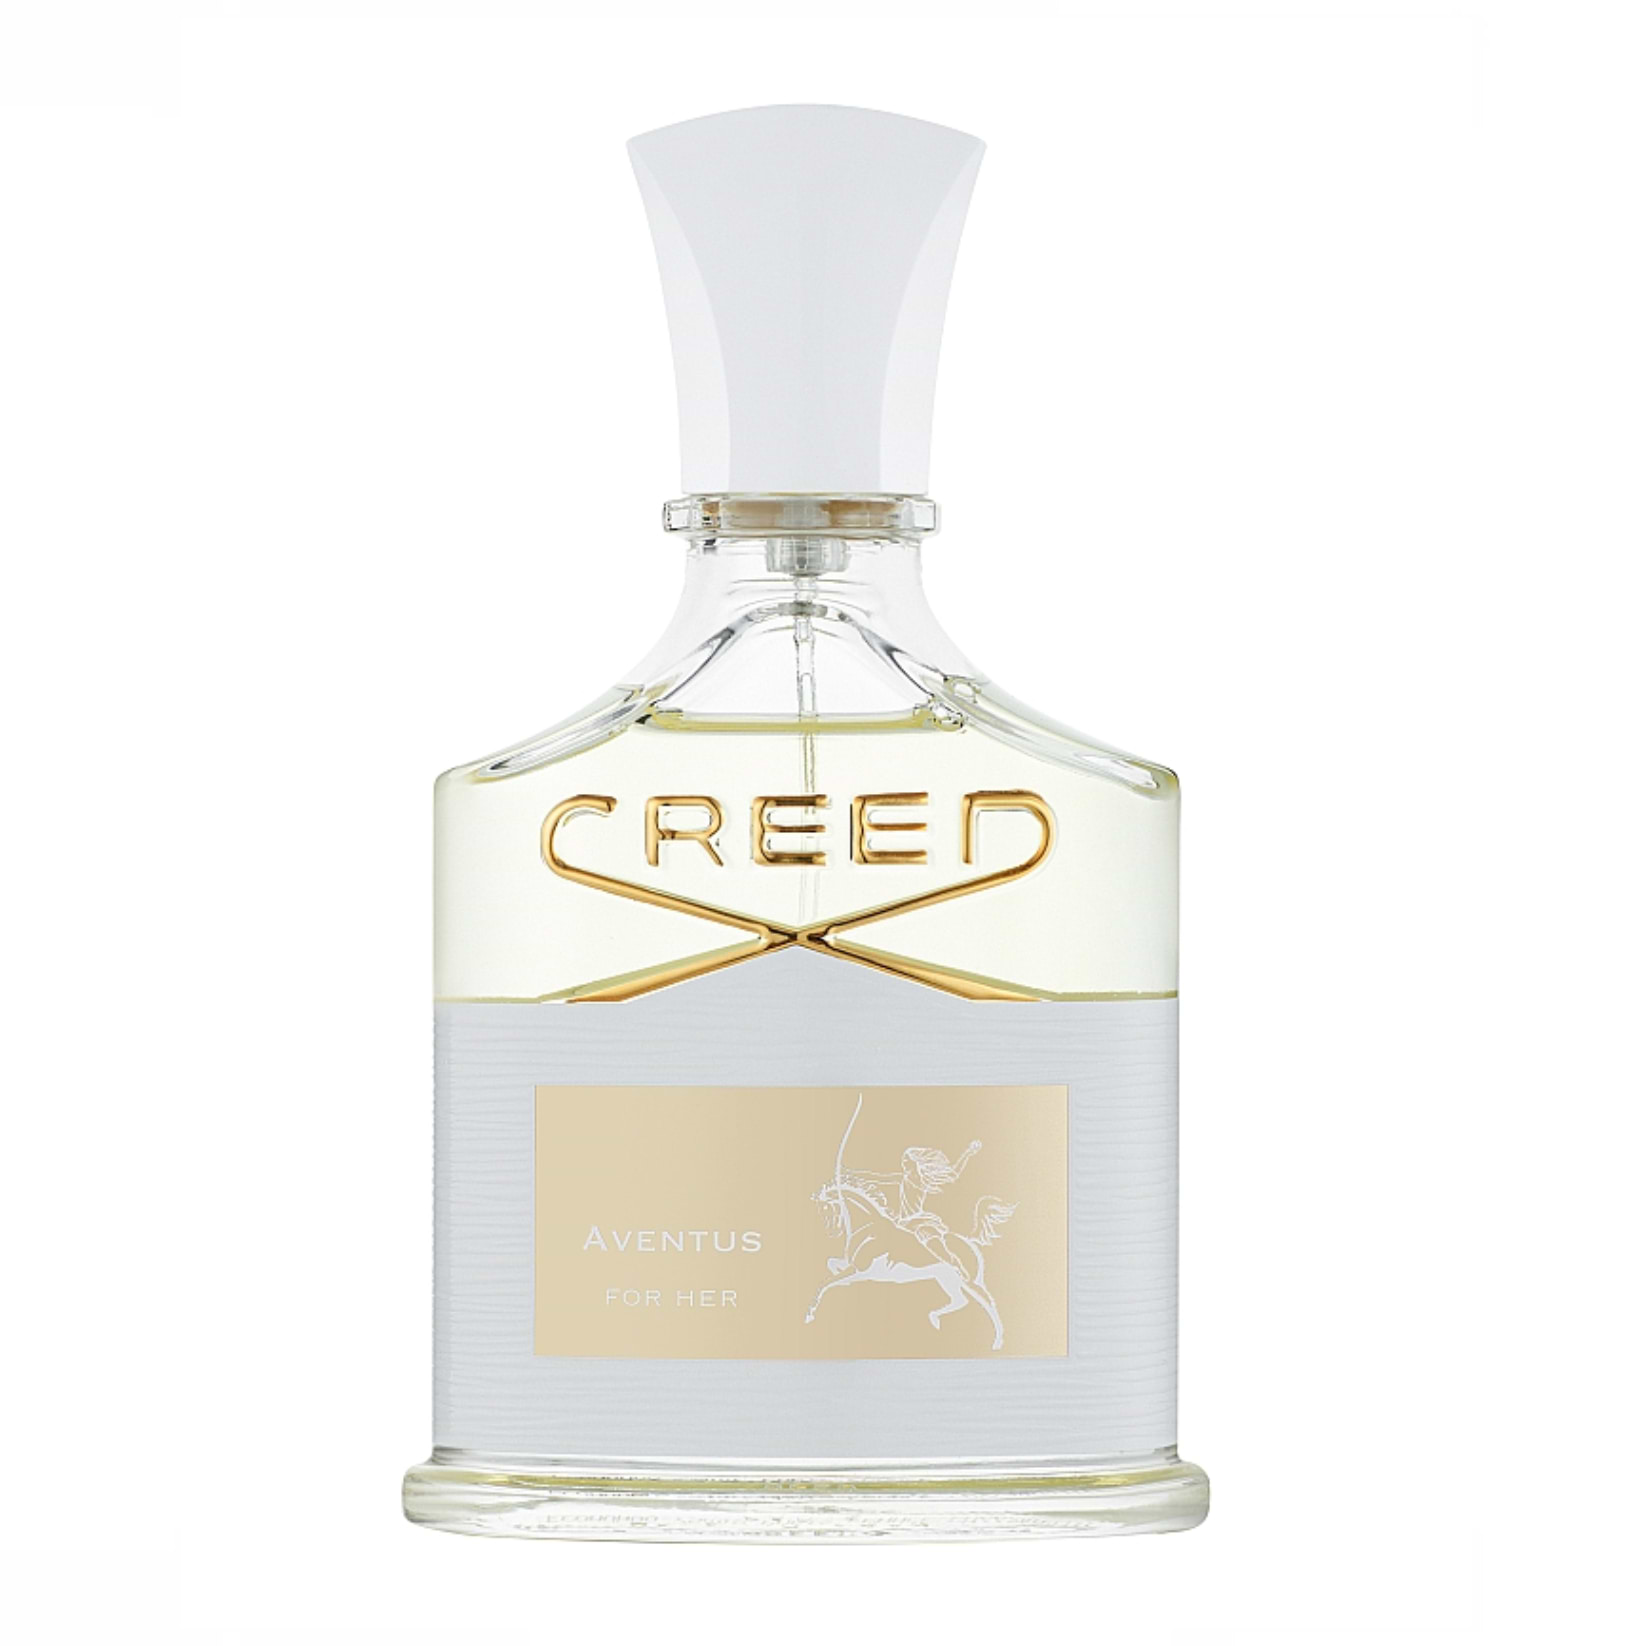 Creed Aventus for Her E.D.P 75ml